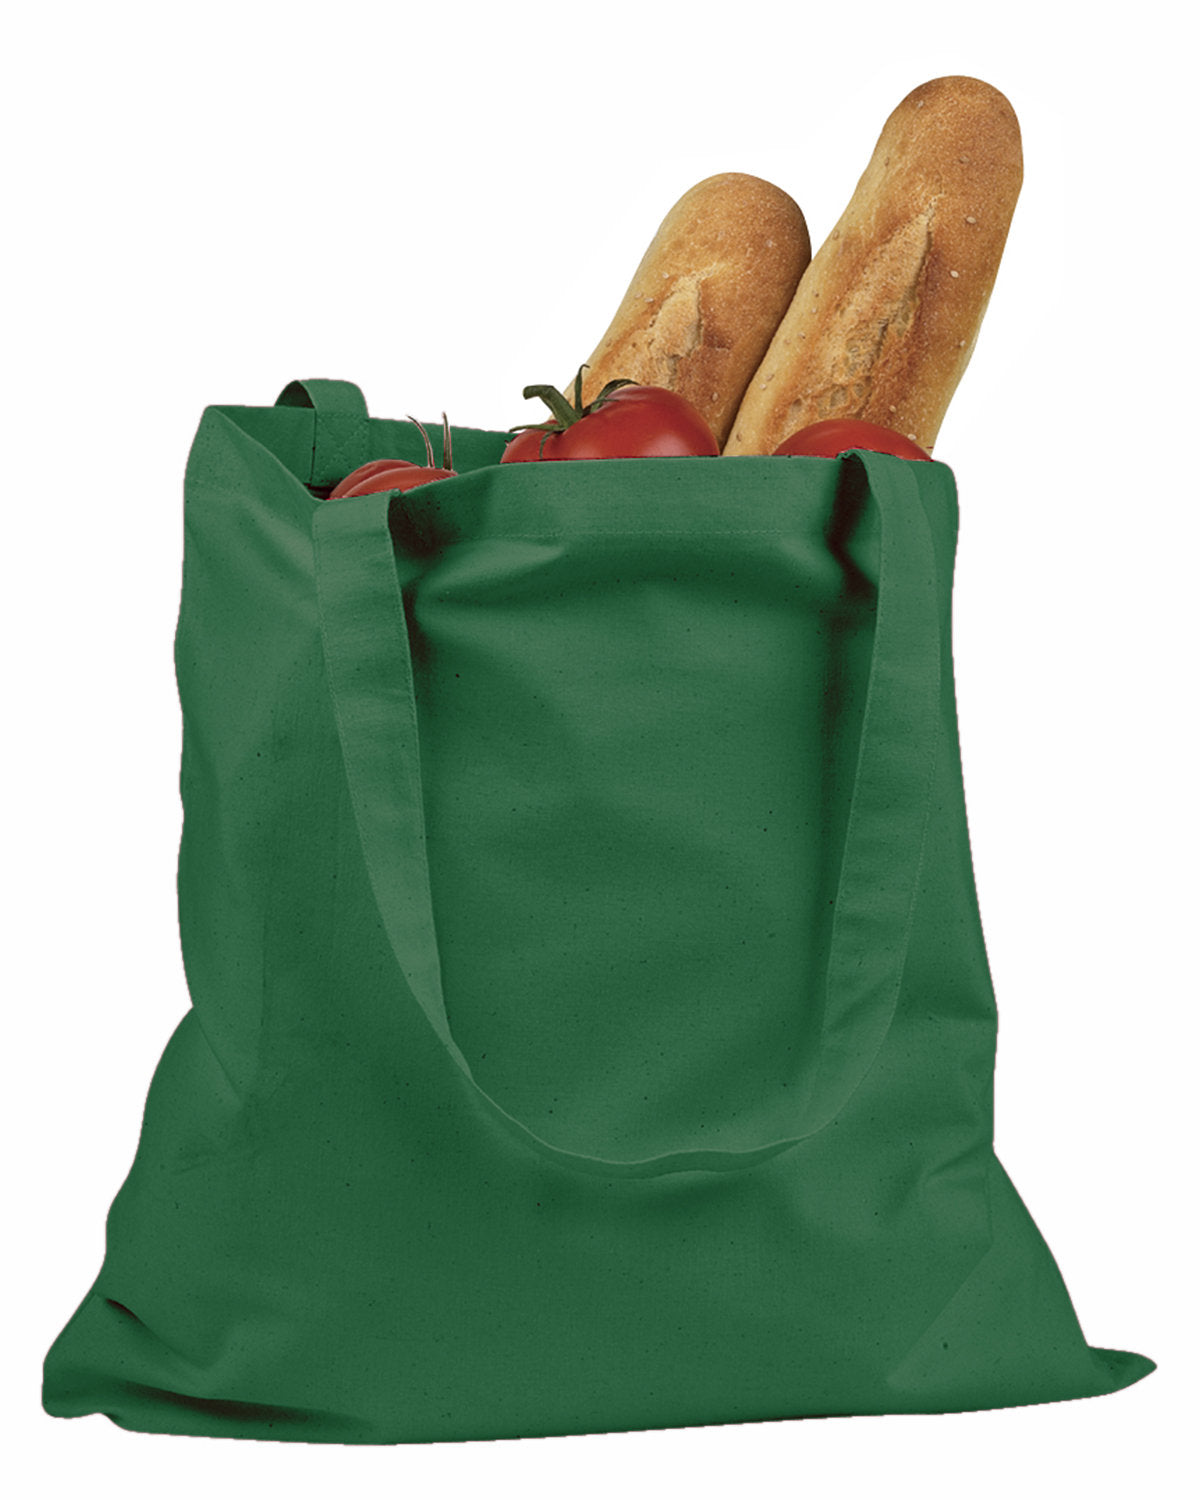 Green tote pictured.